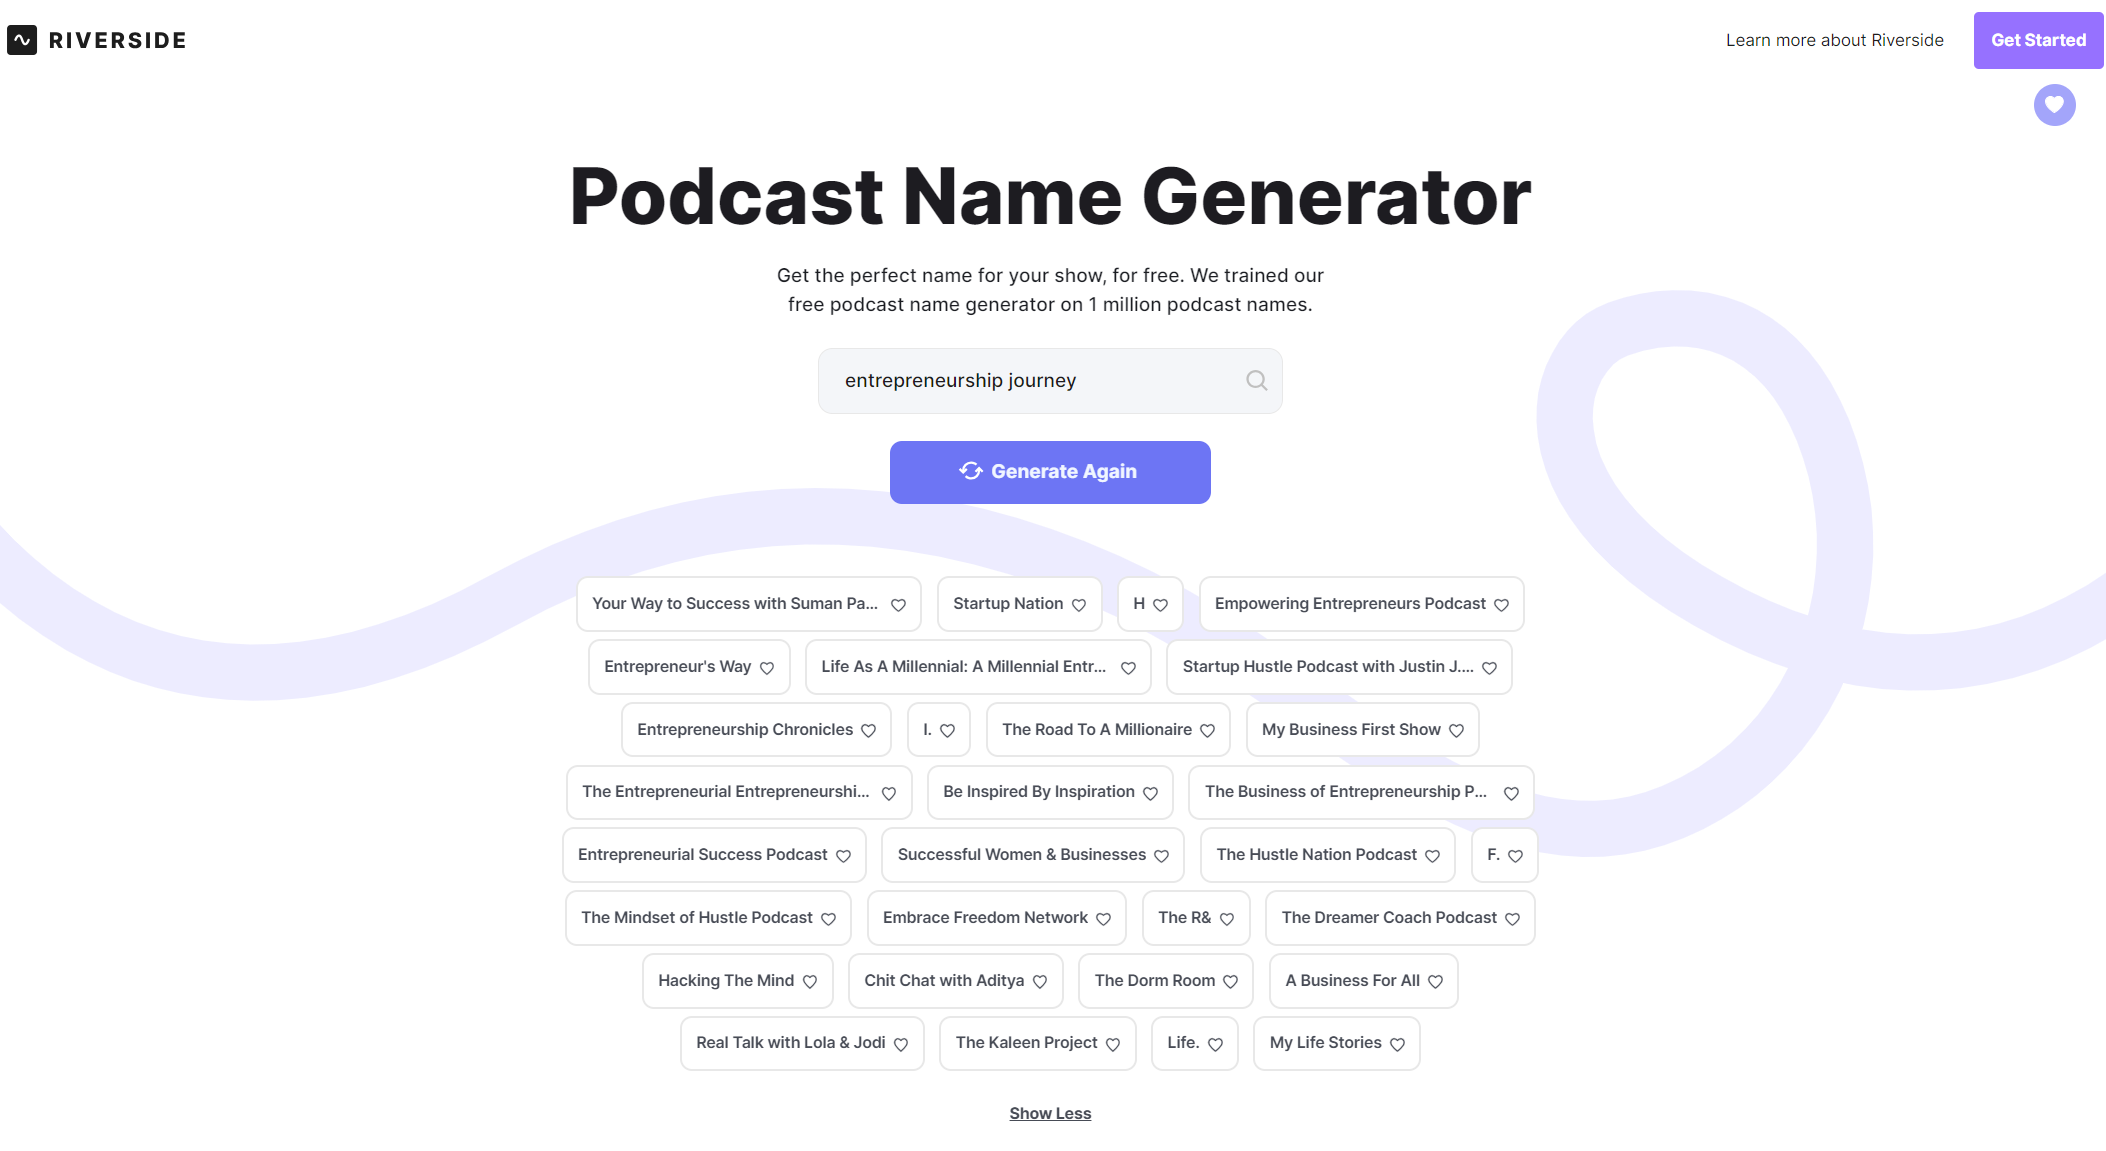 Typical podcast name generator